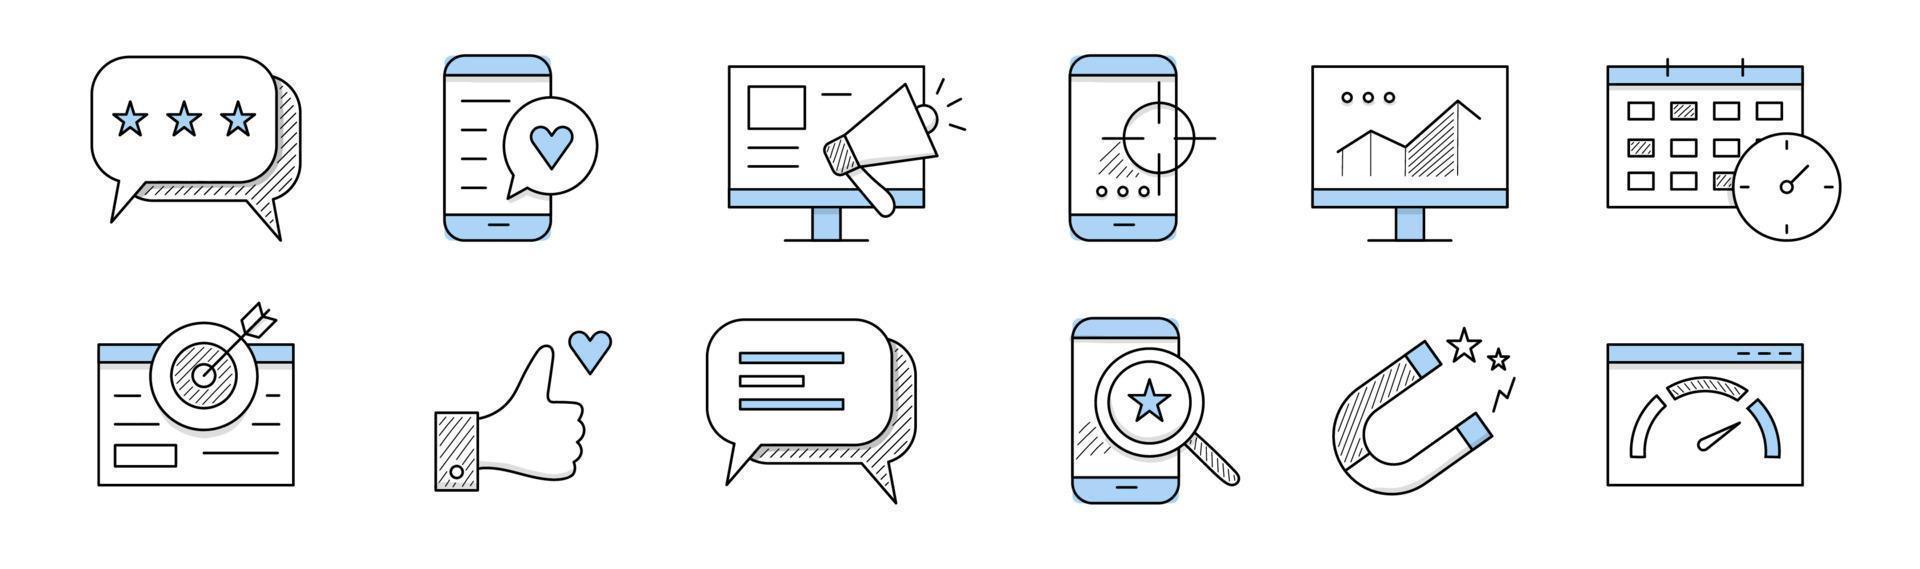 SMM doodle icons, line art isolated vector signs